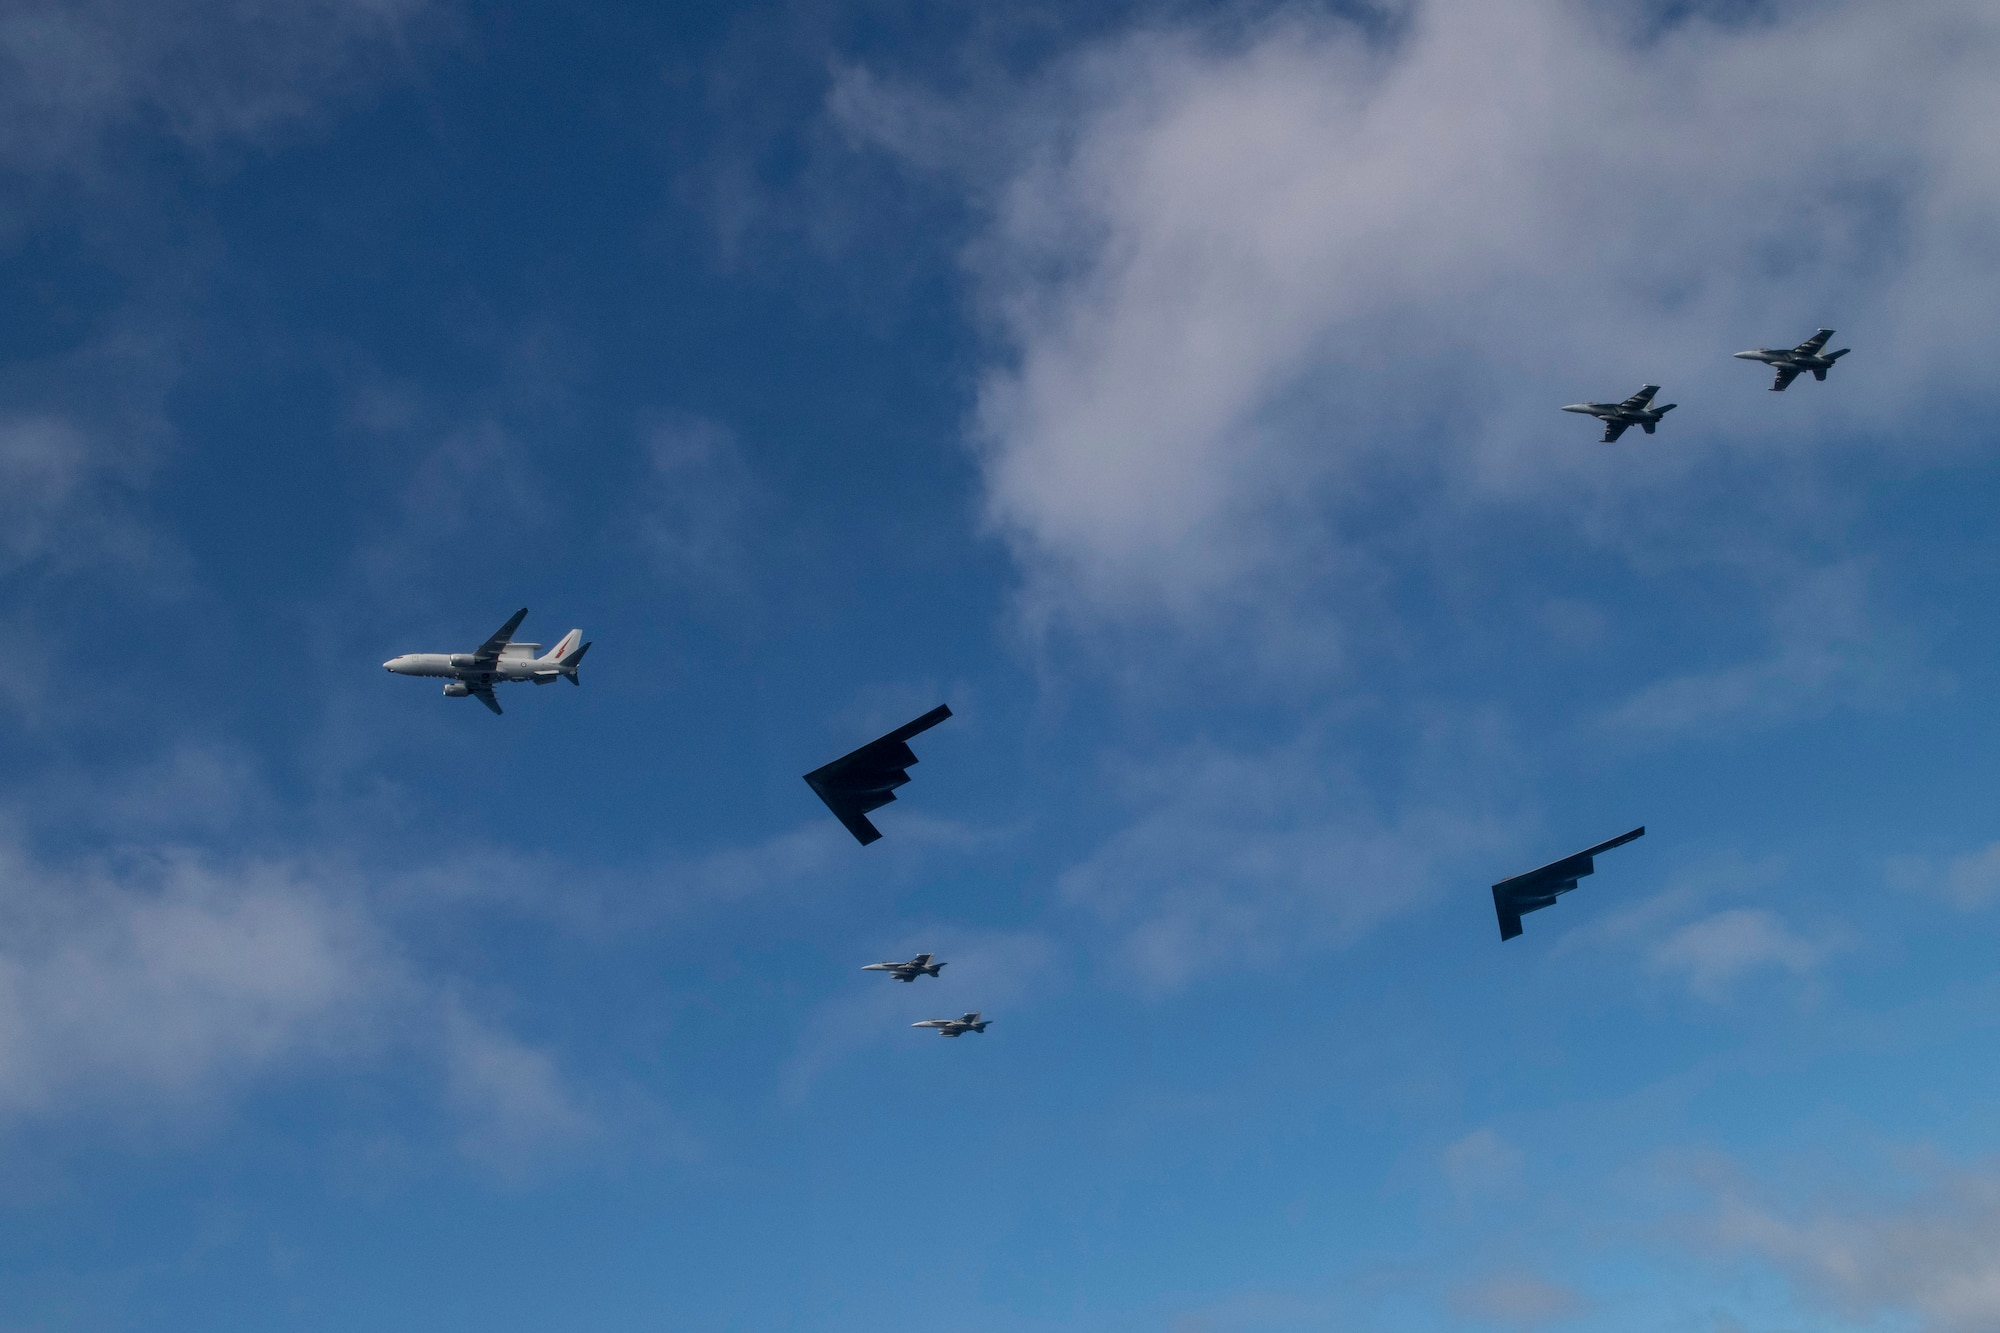 United States Air Force and Royal Australian Air Force aircraft perform bilateral training